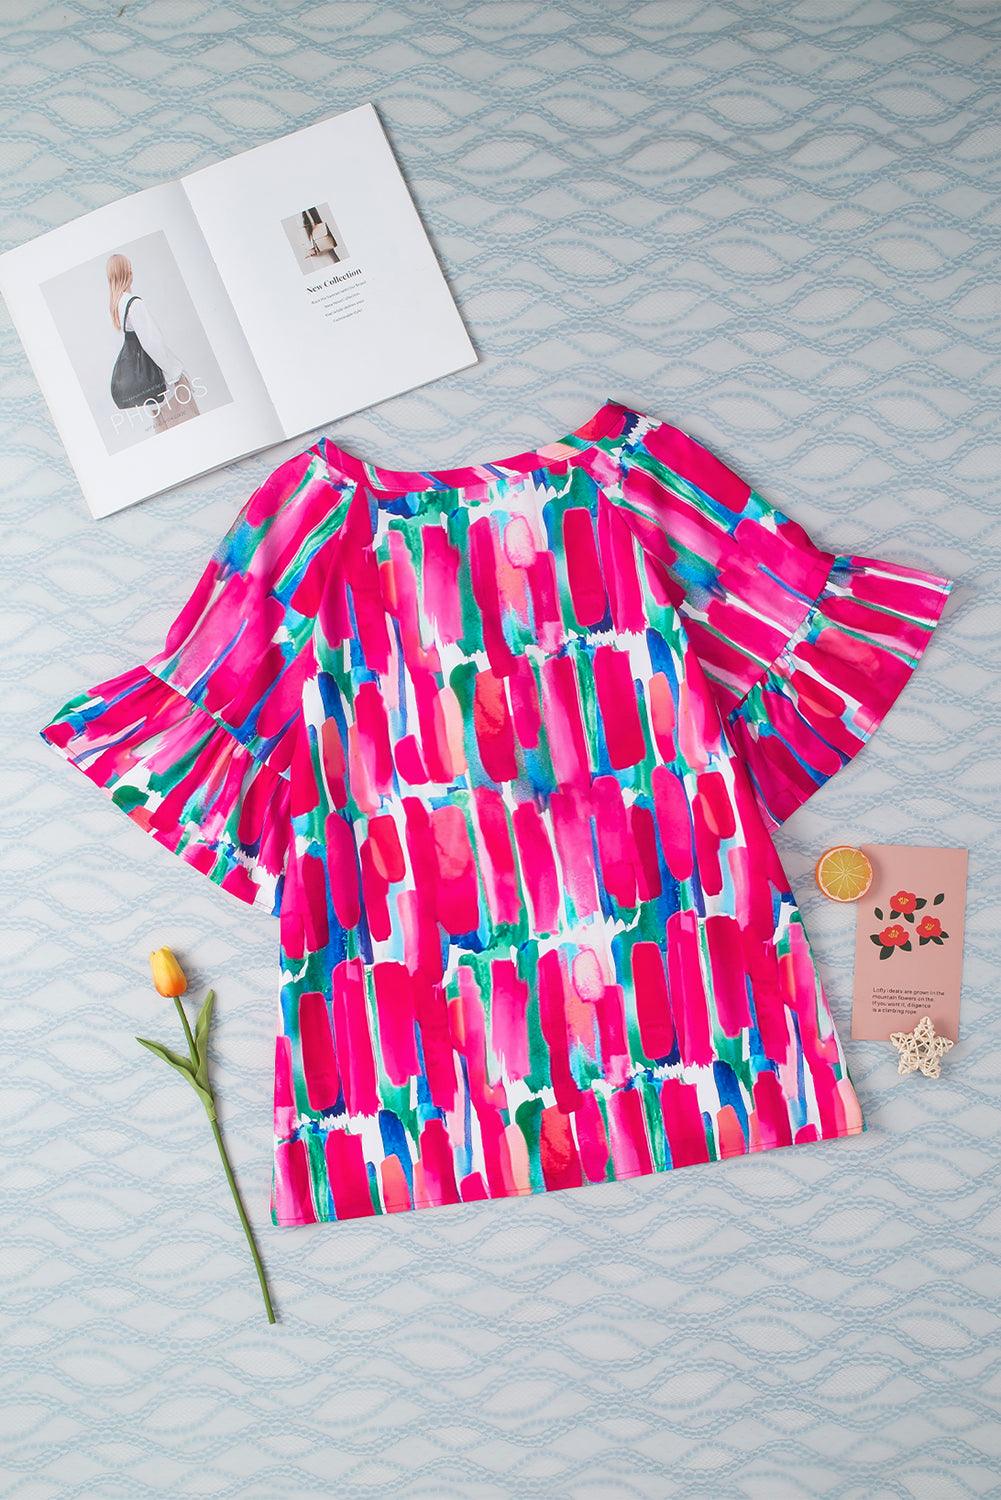 Abstract Hot Pink Brushwork Print Buttoned V Neck Summer Blouse